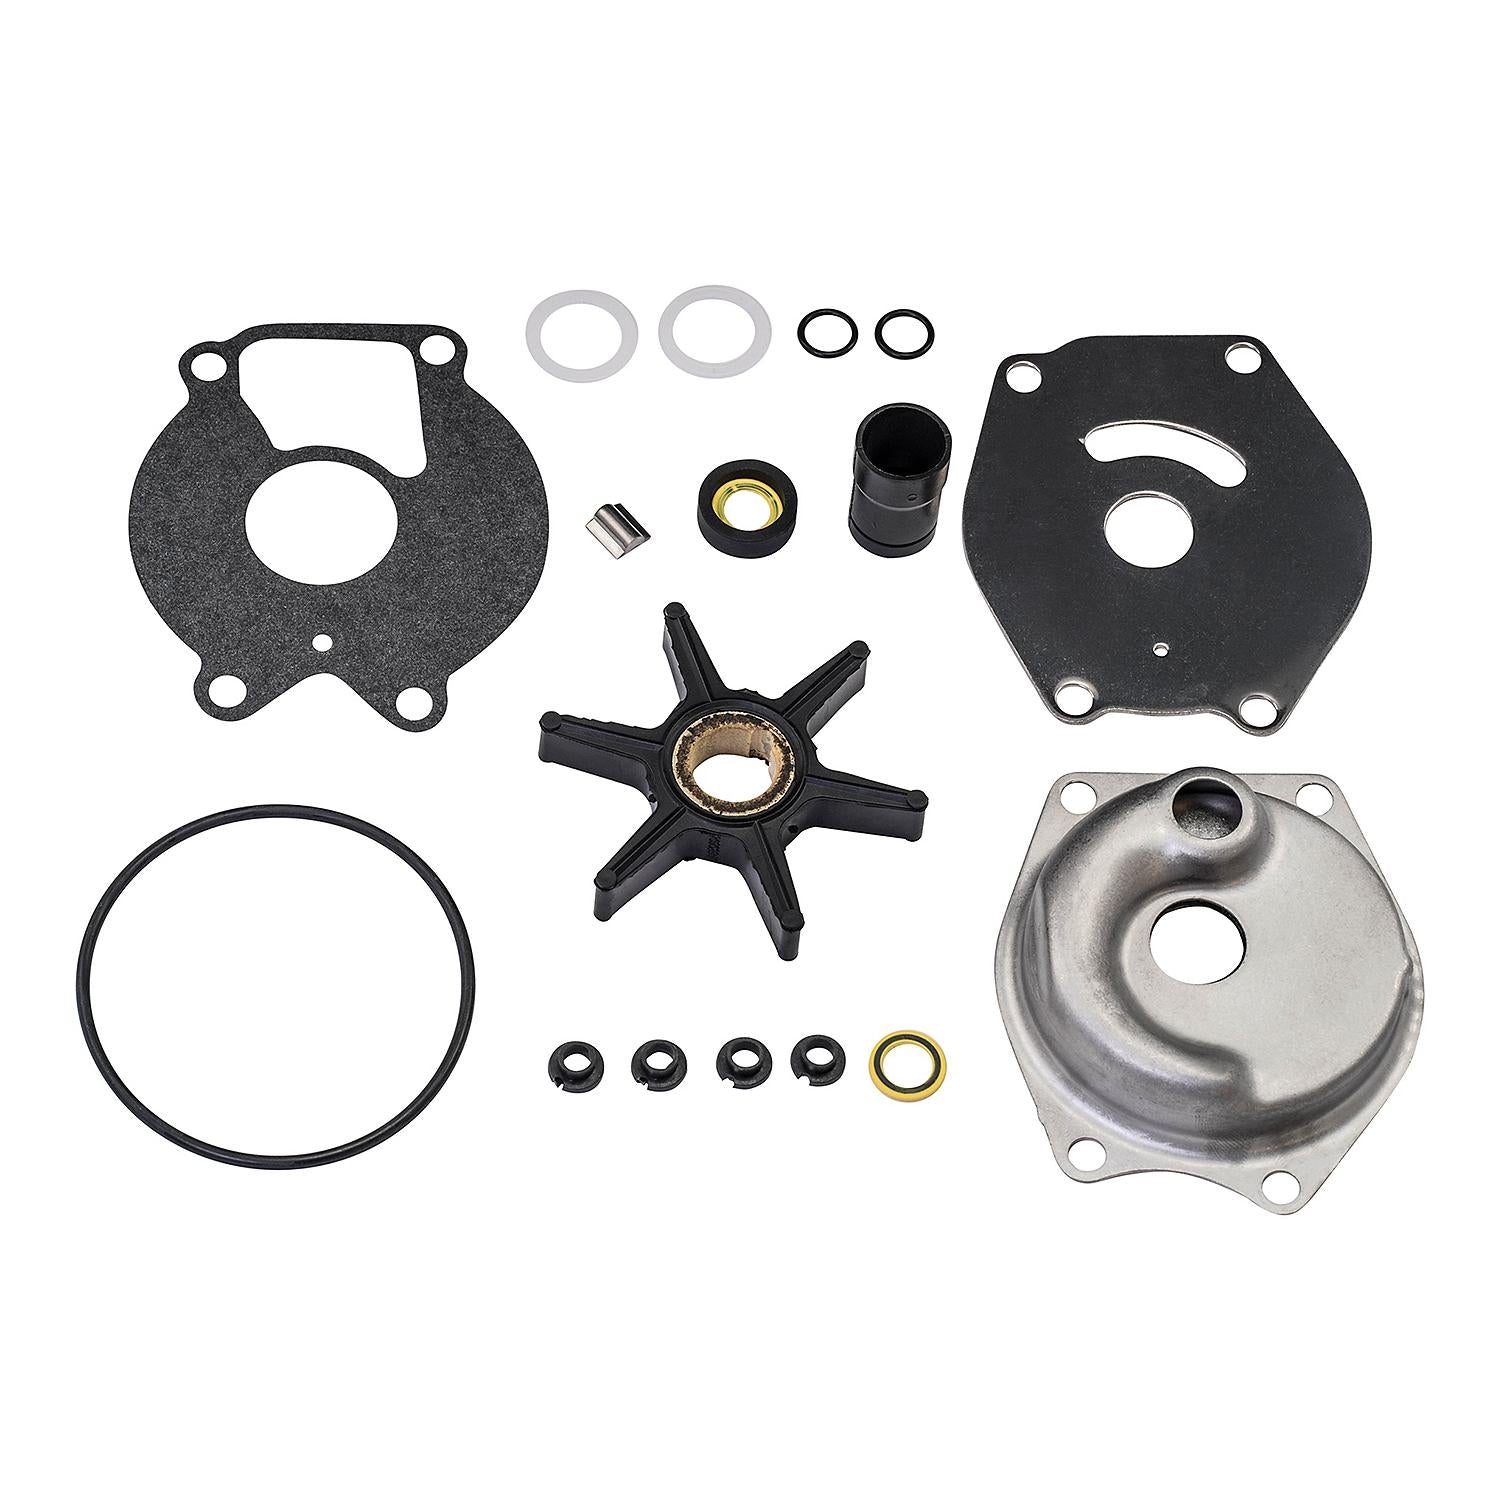 Quicksilver 99157T2 Upper Water Pump Repair Kit for Mercury 2-Stroke Outboards